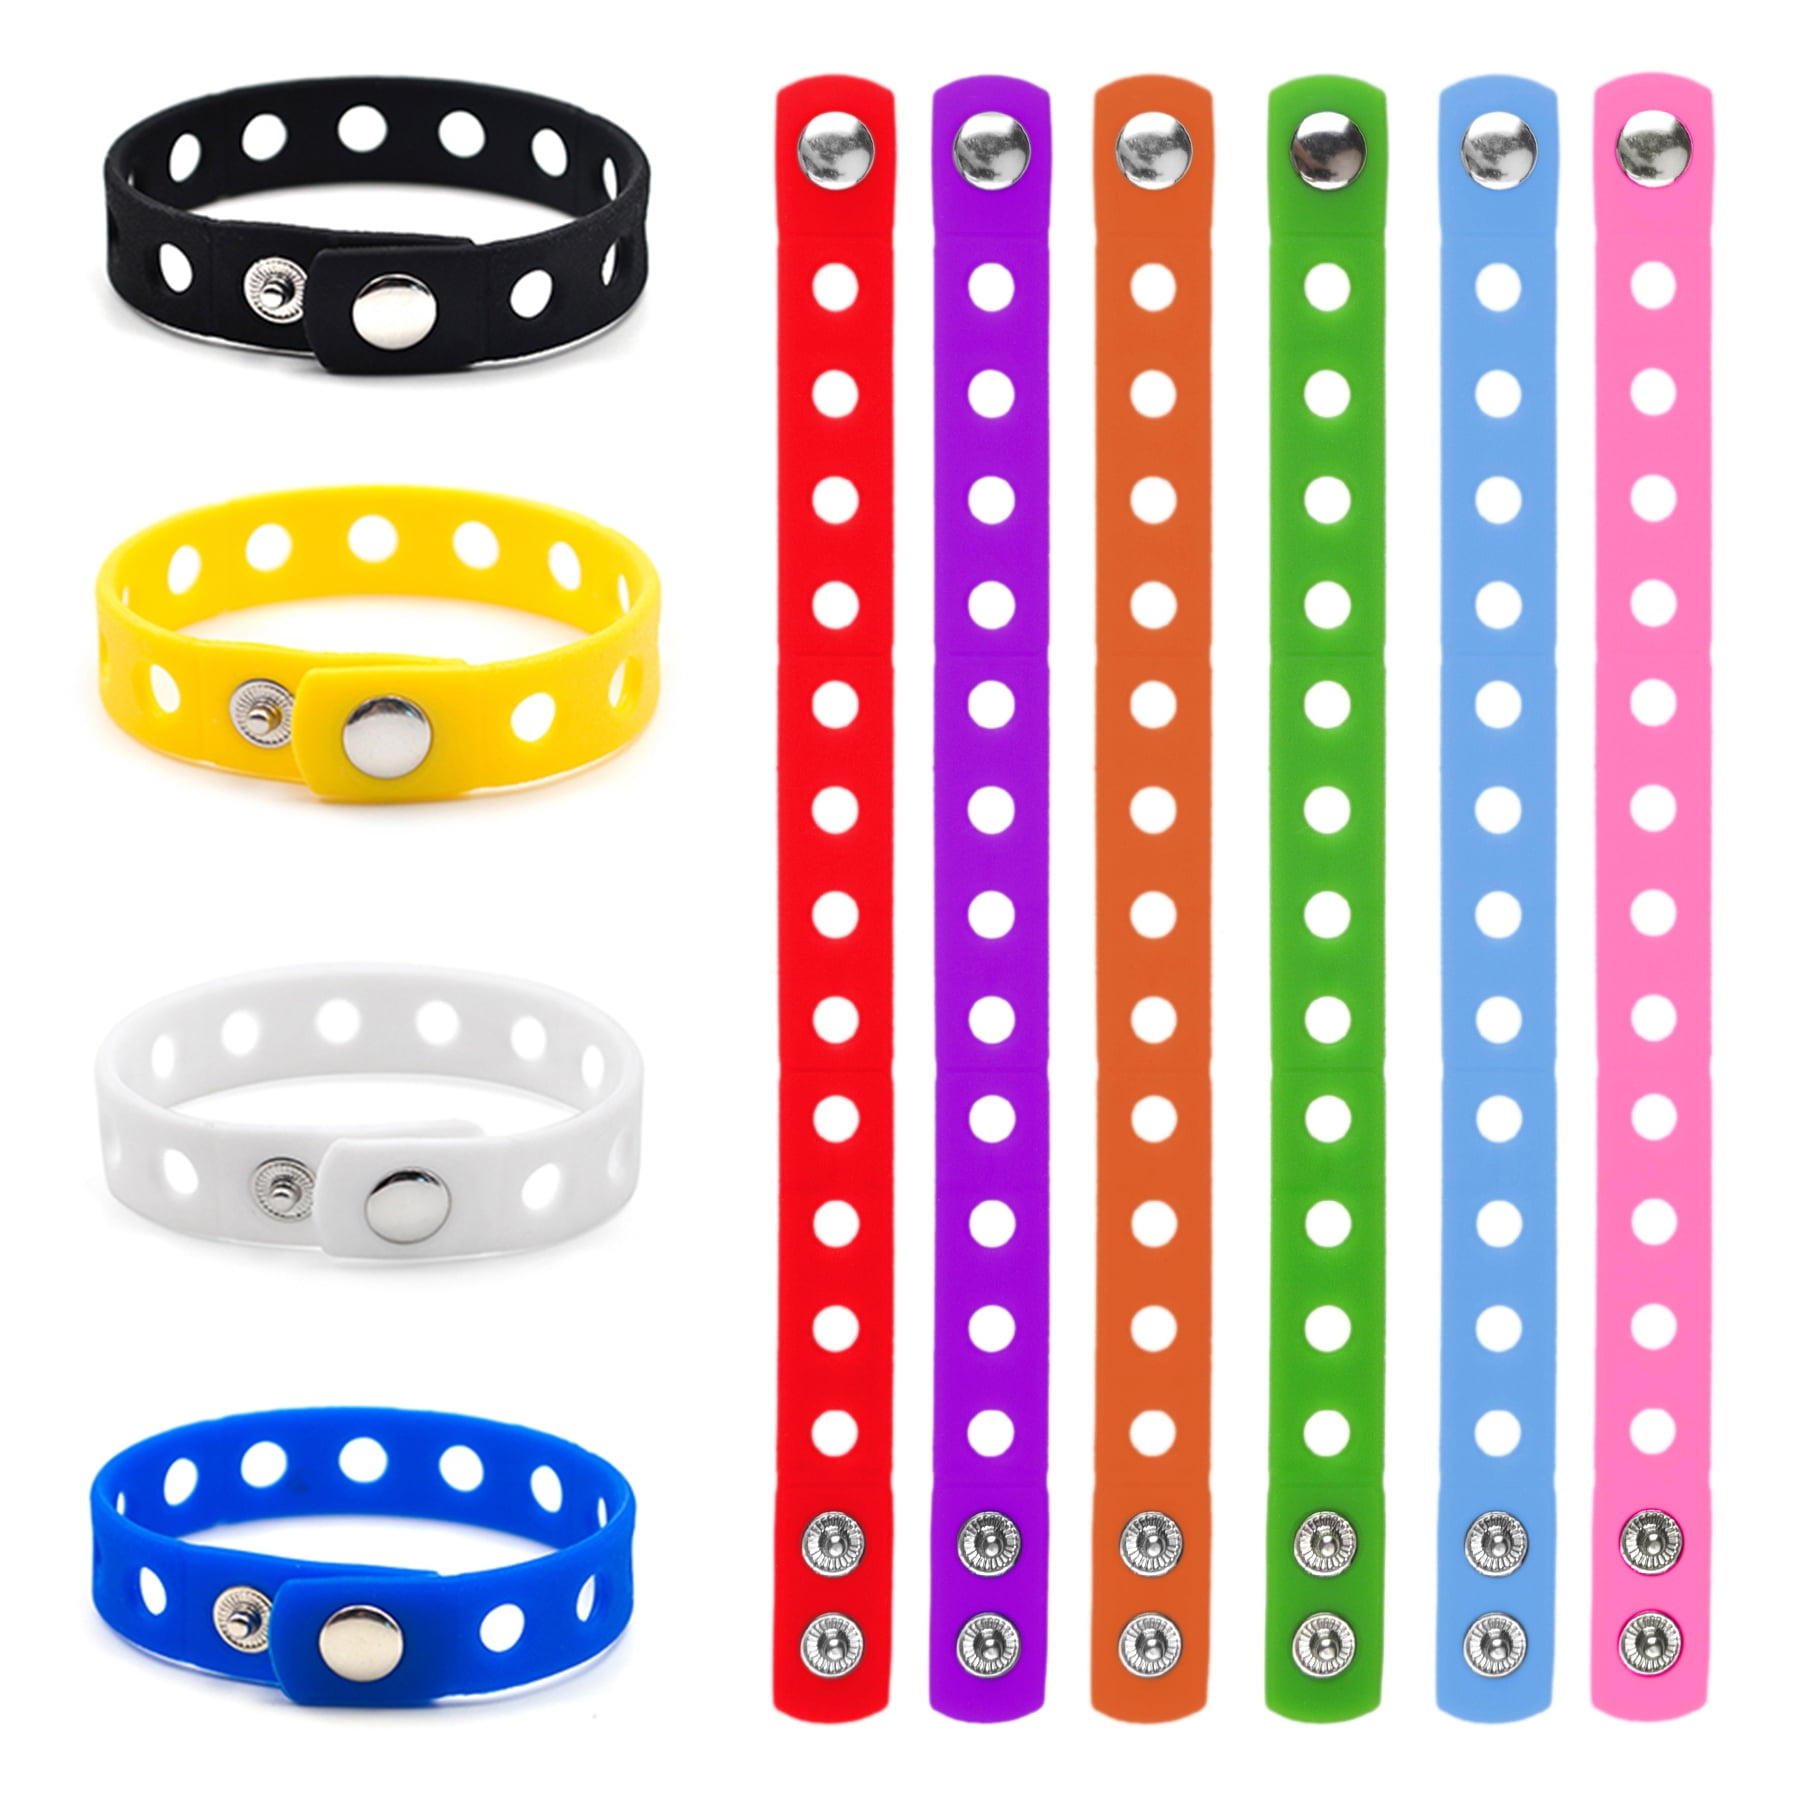 5 Major Benefits Of Custom Silicone Wristbands For Events